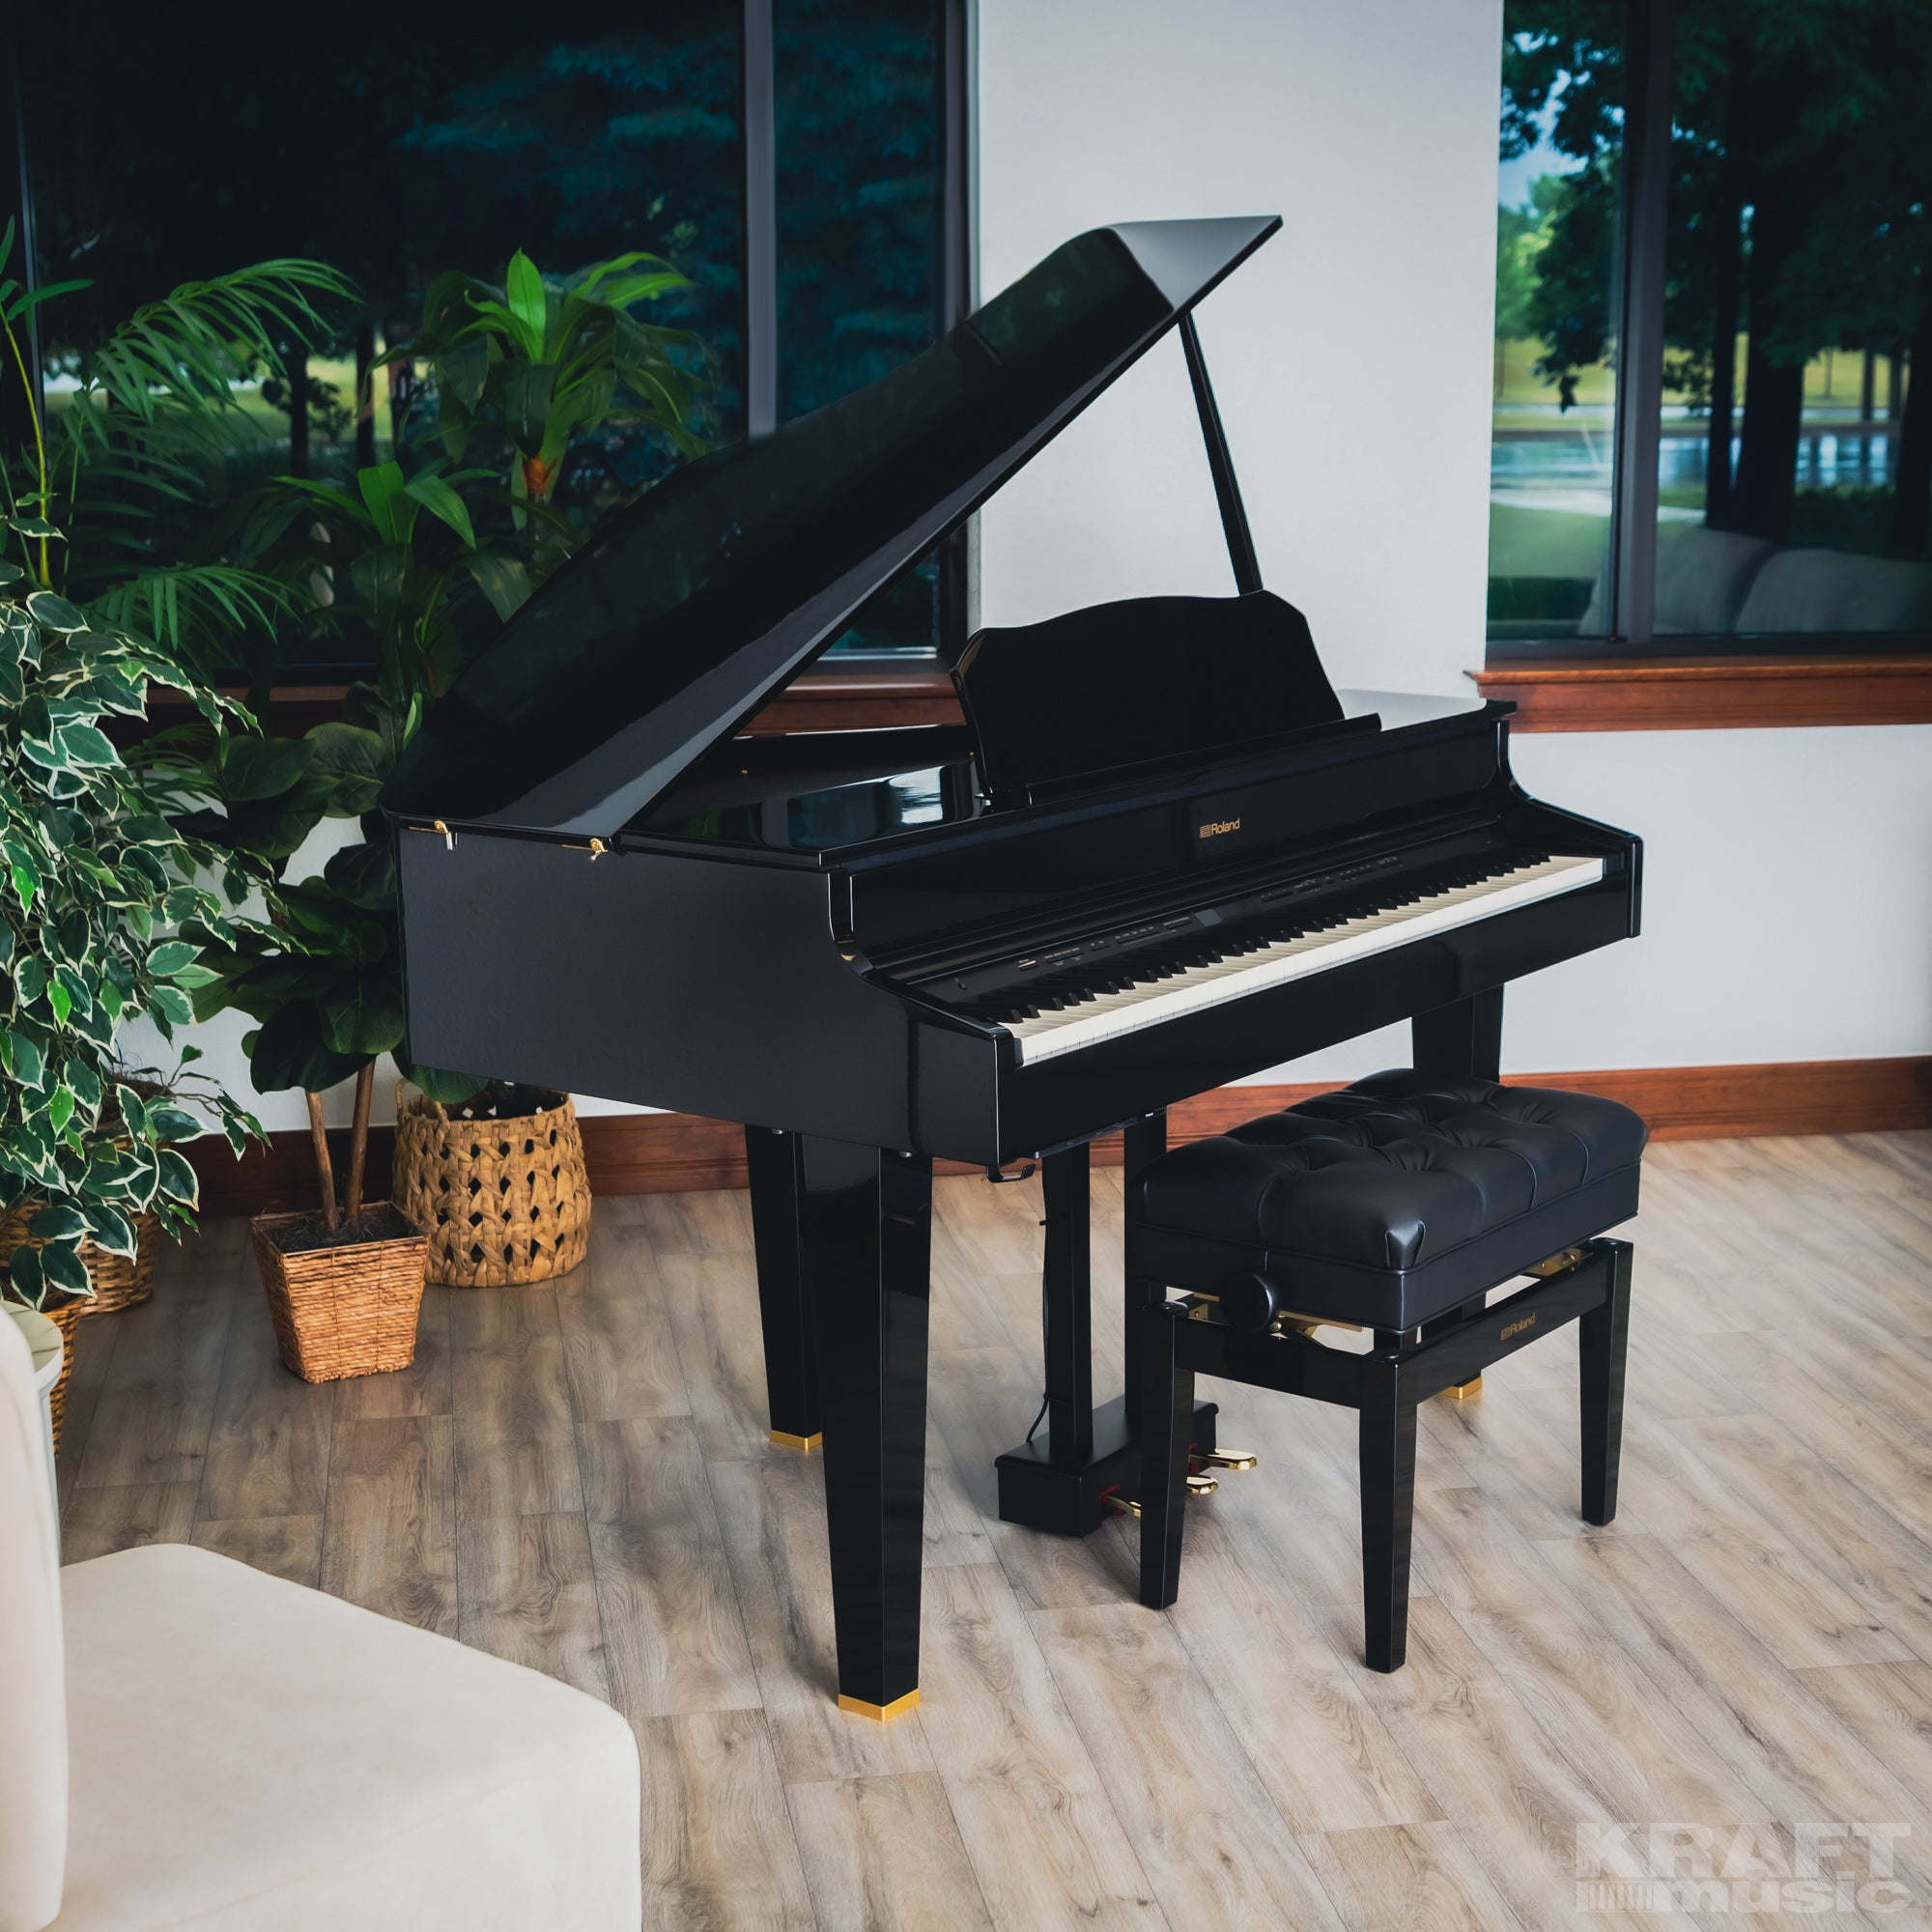 Roland GP607 Digital Grand Piano - Polished Ebony - right view in a stylish music room